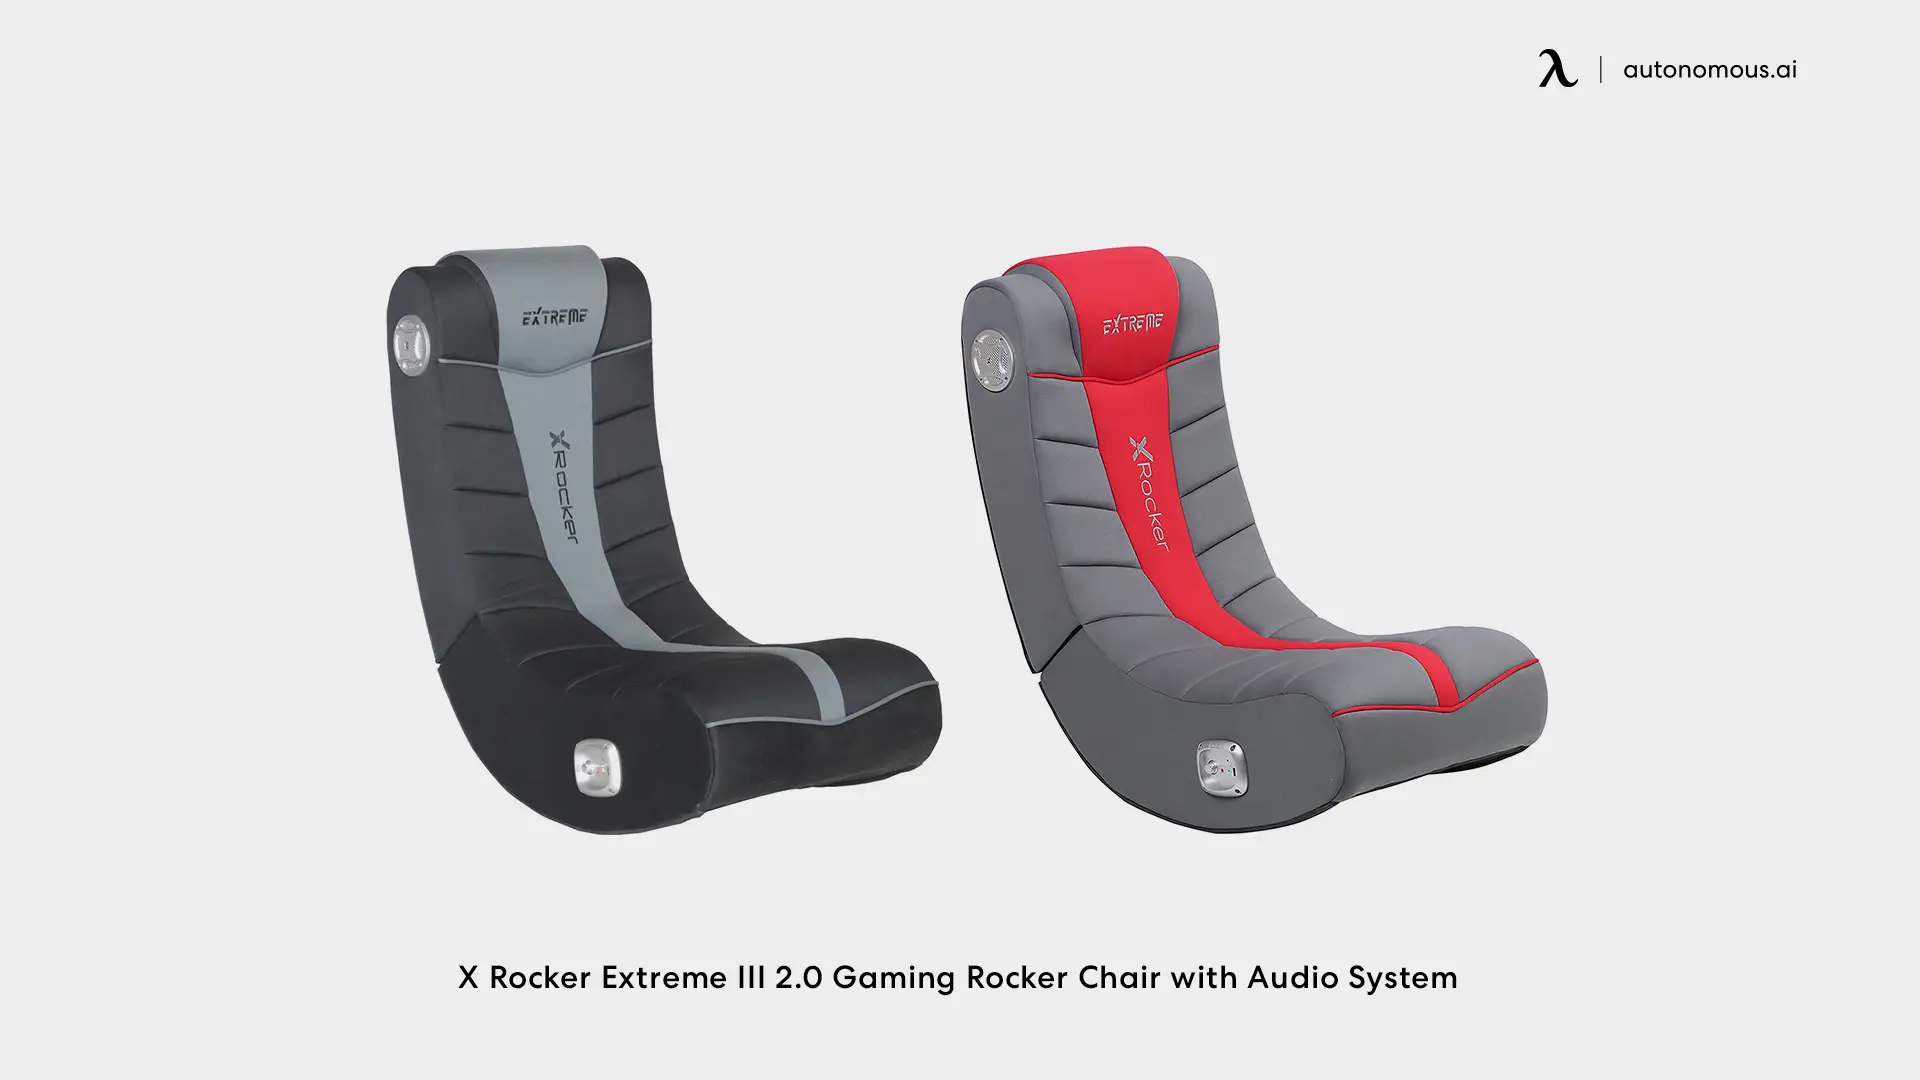 X Rocker Extreme III 2.0 Gaming Rocker Chair with Audio System